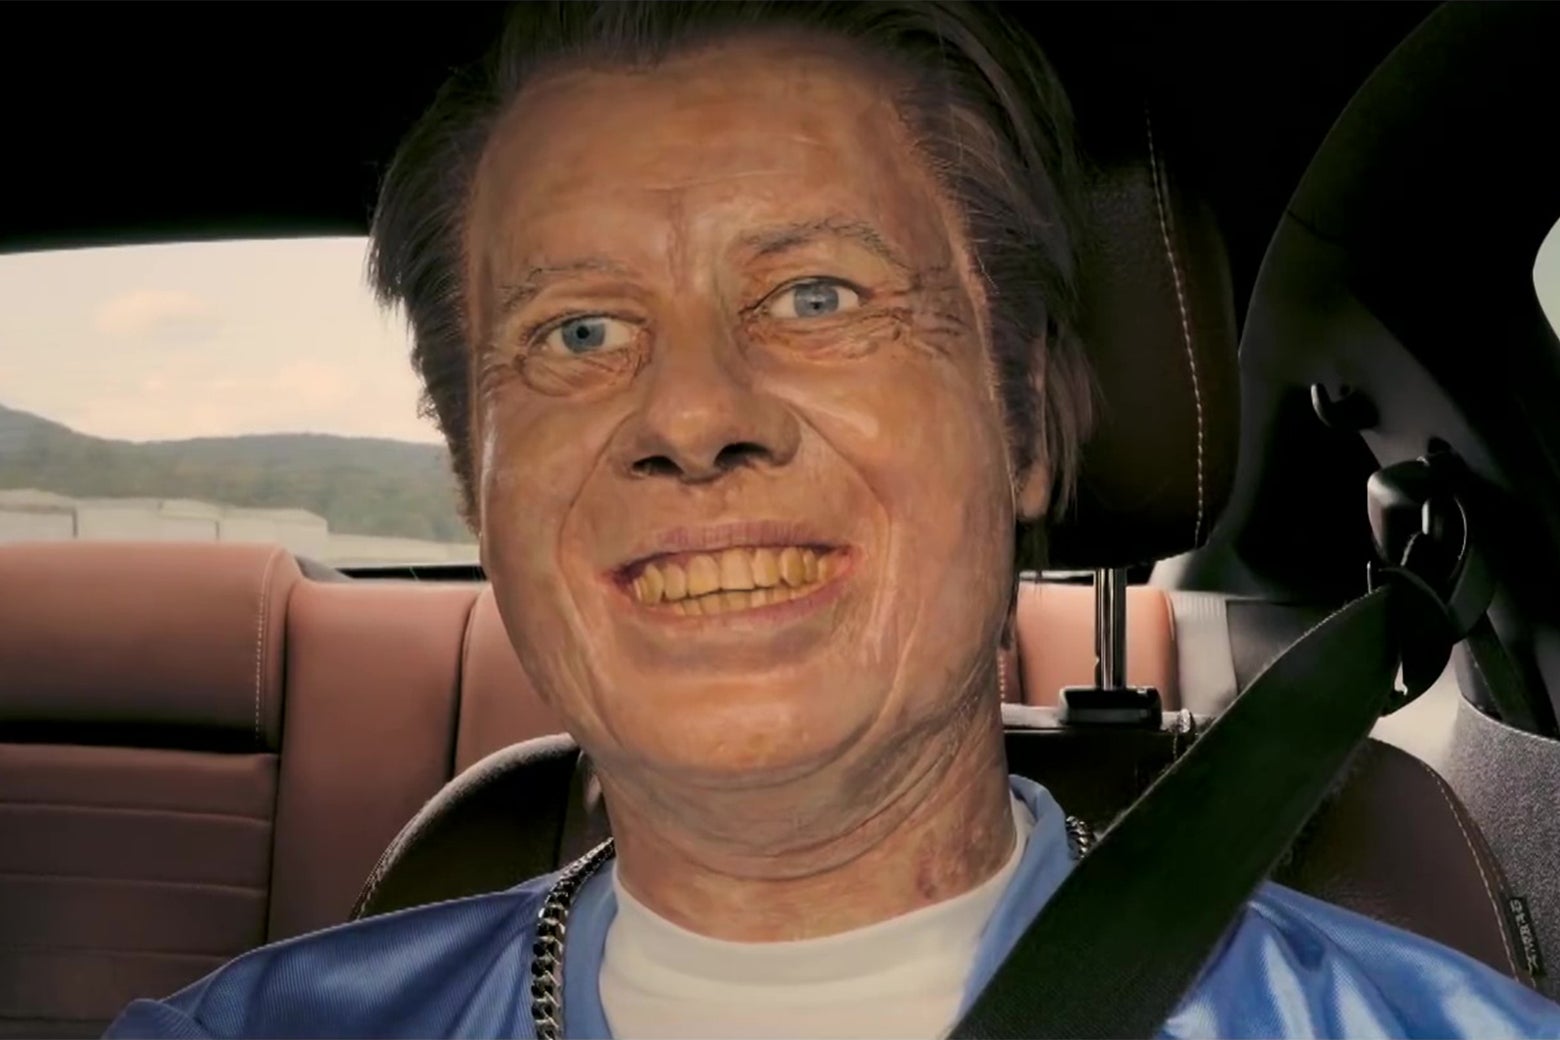 A bad wax statue of Jimmy Carter, posed to look like he's driving a car.